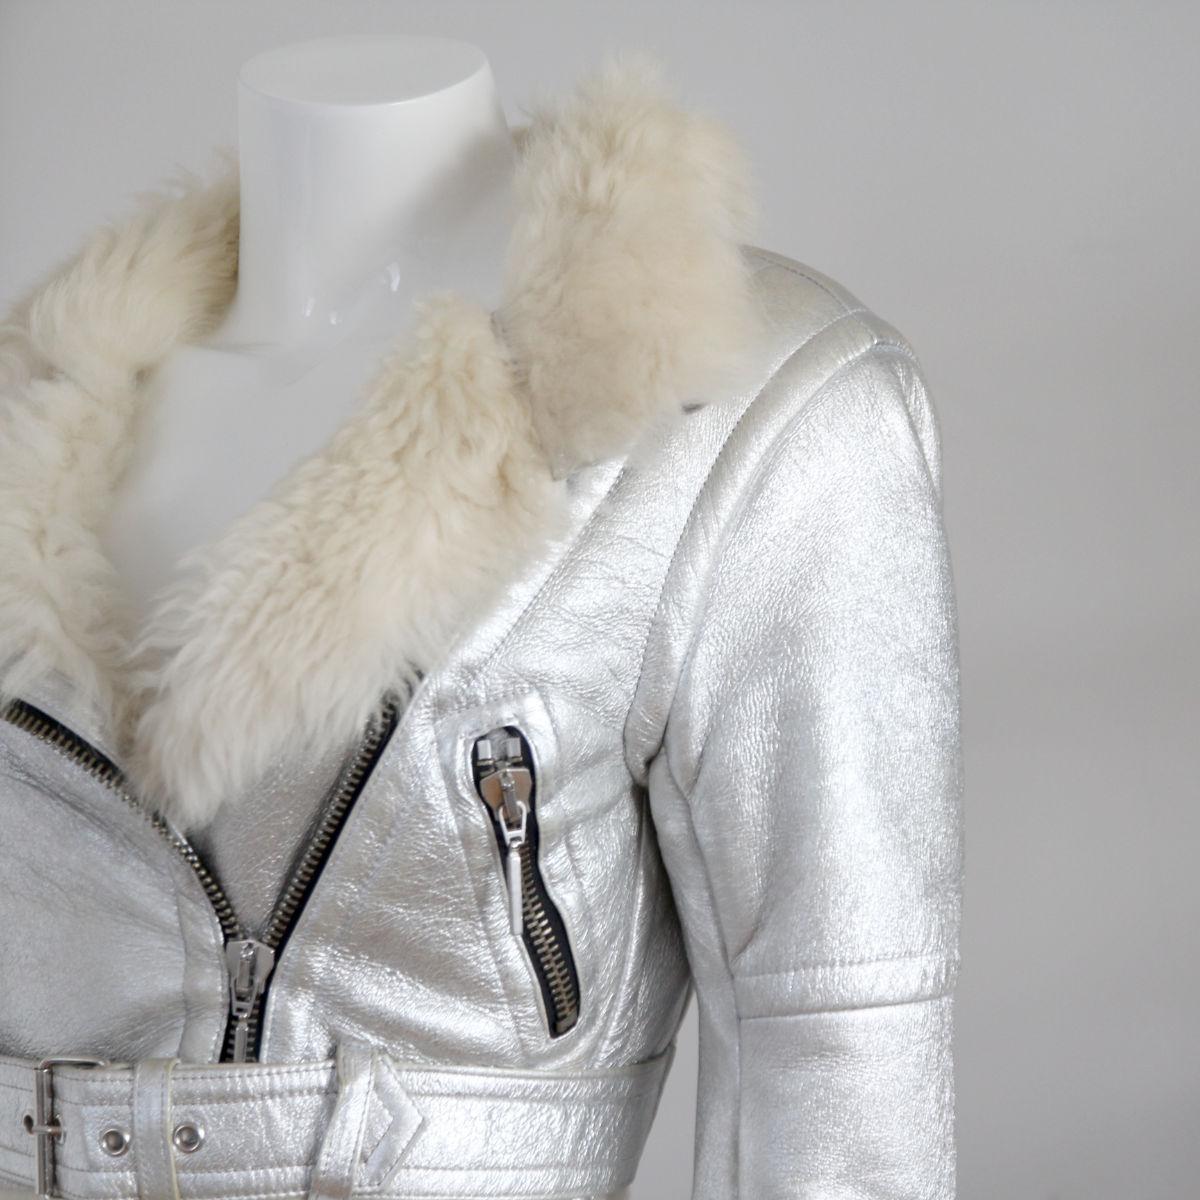 PLEIN SUD

2000s. Silver colored leather biker jacket from Plein Sud.

The jacket is in good condition (see photos).
Minimal abrasion.